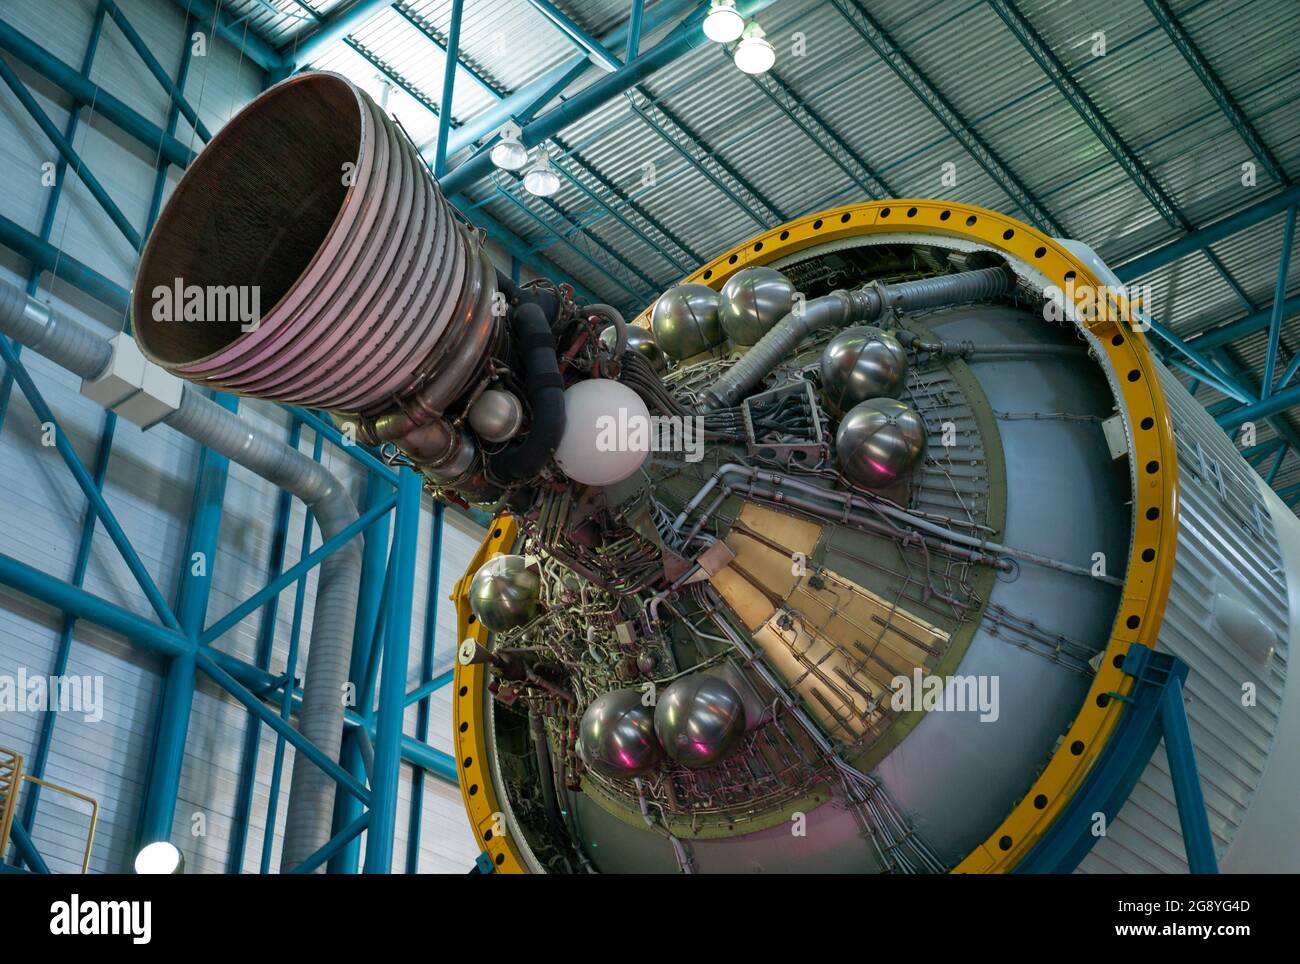 Cape Canaveral, Florida, United States - July 21 2021: Saturn V Moon Rocket Third Stage Engine Exhaust of the Apollo Program Spacecraft. Stock Photo